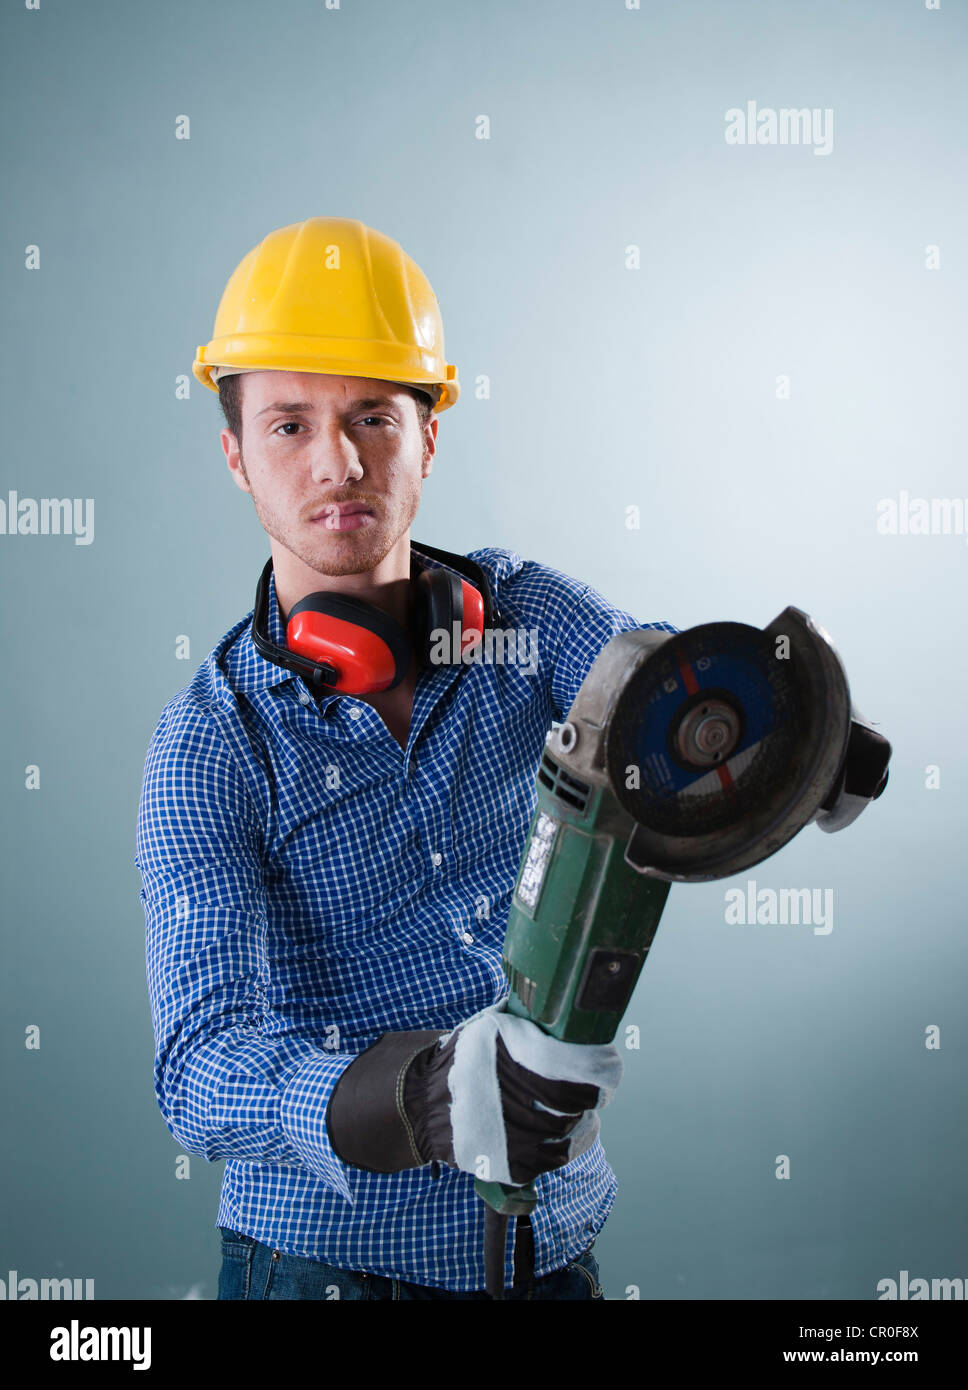 Young tradesman holding an angle grinder Stock Photo